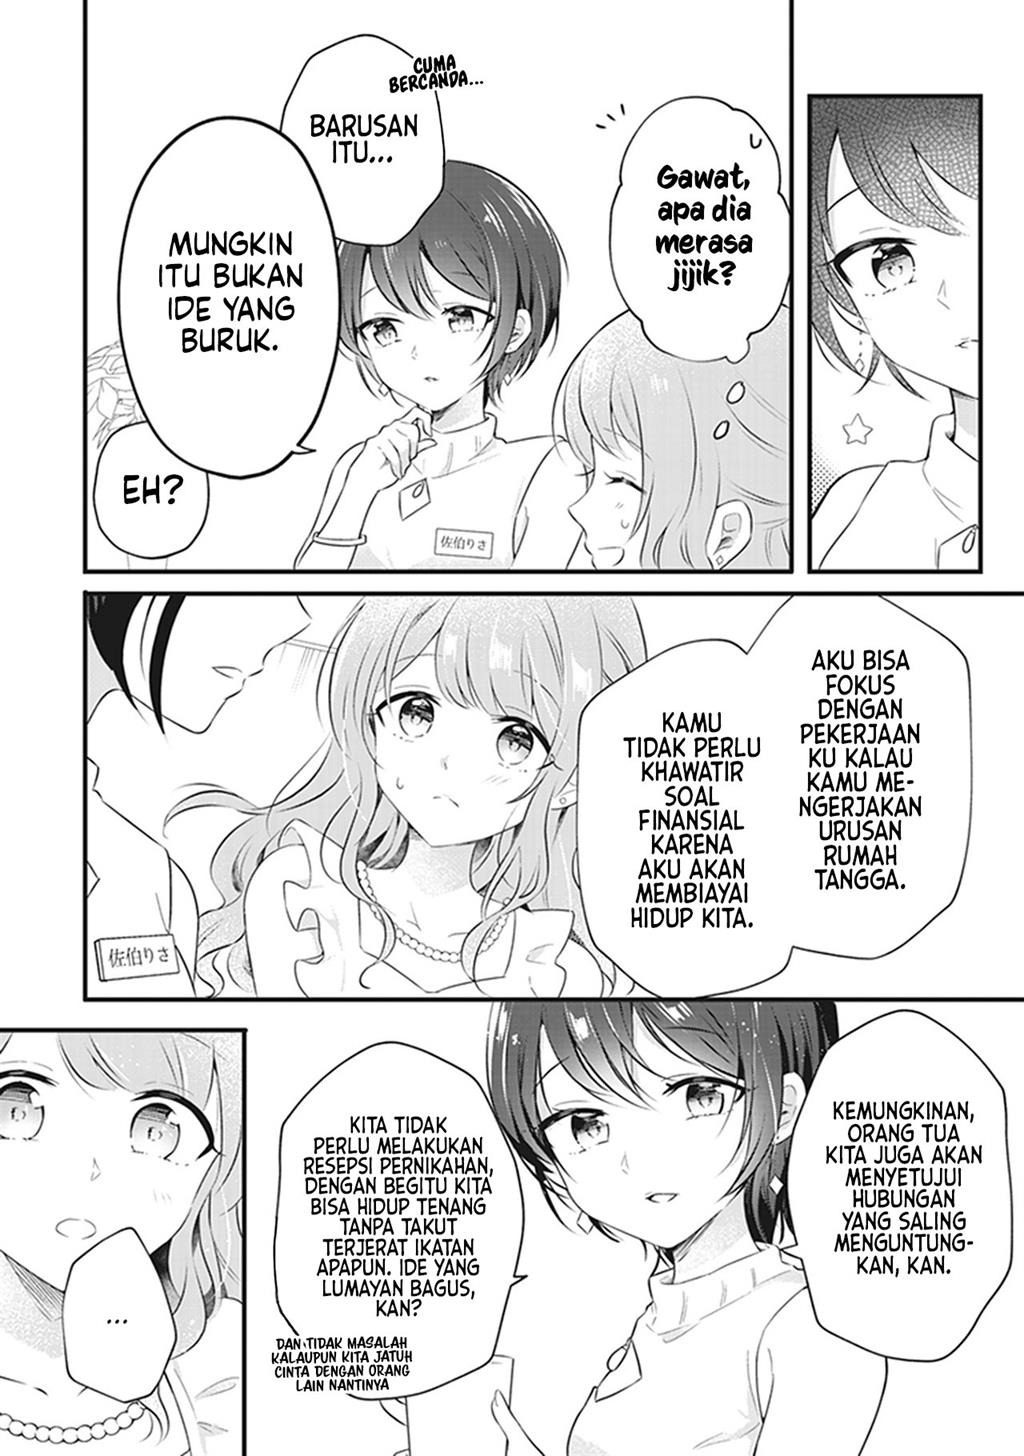 White Lilies in Love BRIDE’s Newlywed Yuri Anthology Chapter 4